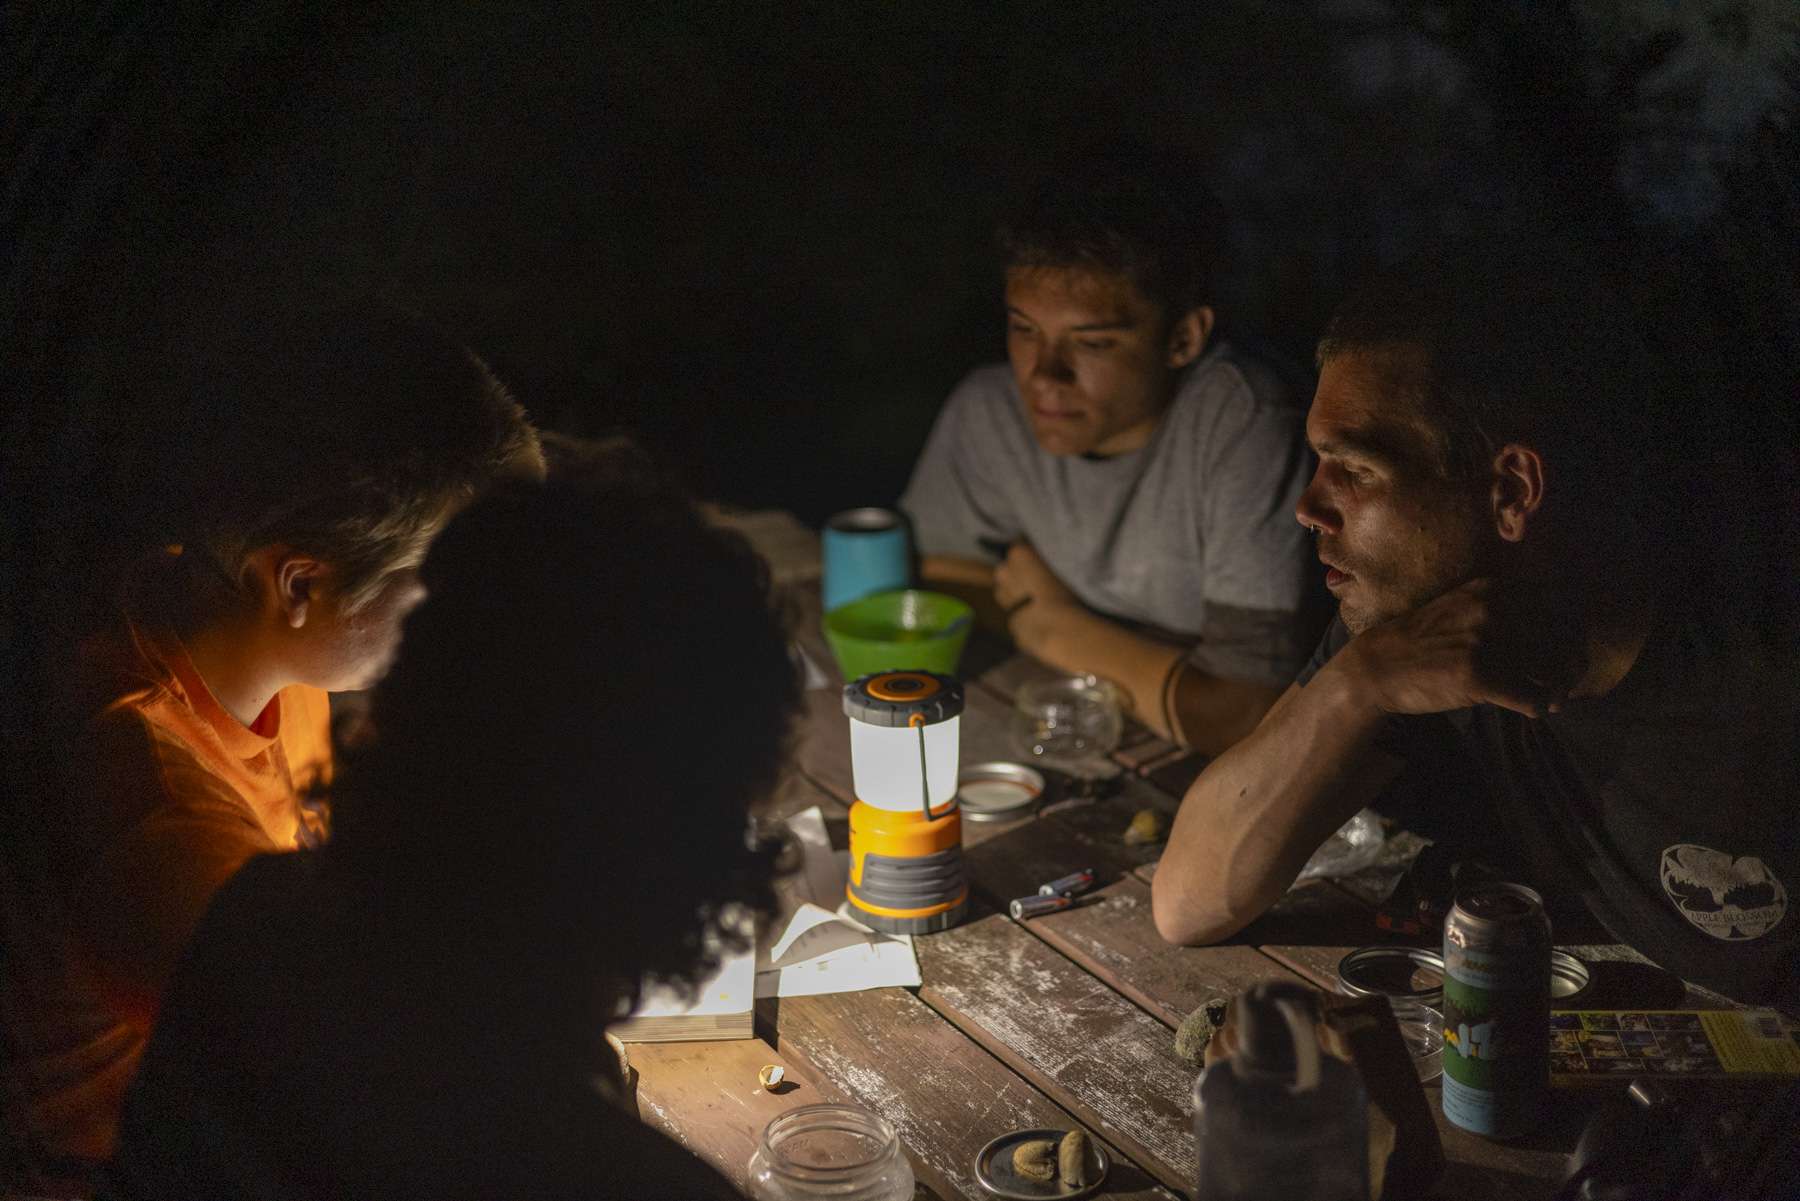 The crew, led by Will Lockwood,  discusses mushrooms after dark.  